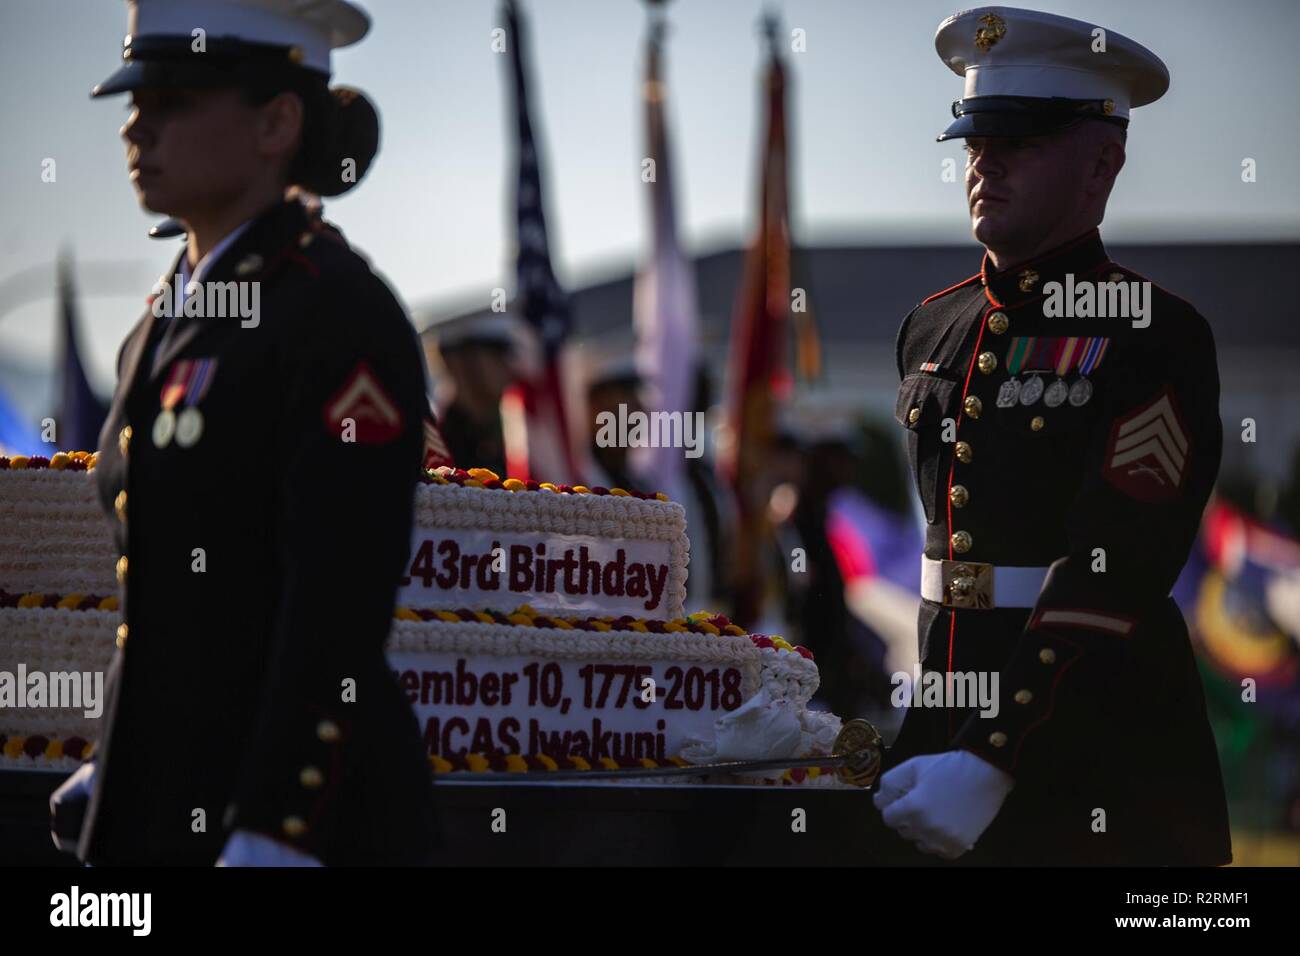 U.S. Marines with Headquarters and Headquarters Squadron (H&HS) carry a Marine Corps birthday cake during the 243rd Marine Corps birthday uniform pageant at Marine Corps Air Station Iwakuni, Japan, Nov. 5, 2018. The annual ceremony was held in honor of the 243rd Marine Corps birthday. It included a historical uniform pageant to honor Marines of the past, present and future while signifying the passing of traditions from one generation to the next. Stock Photo